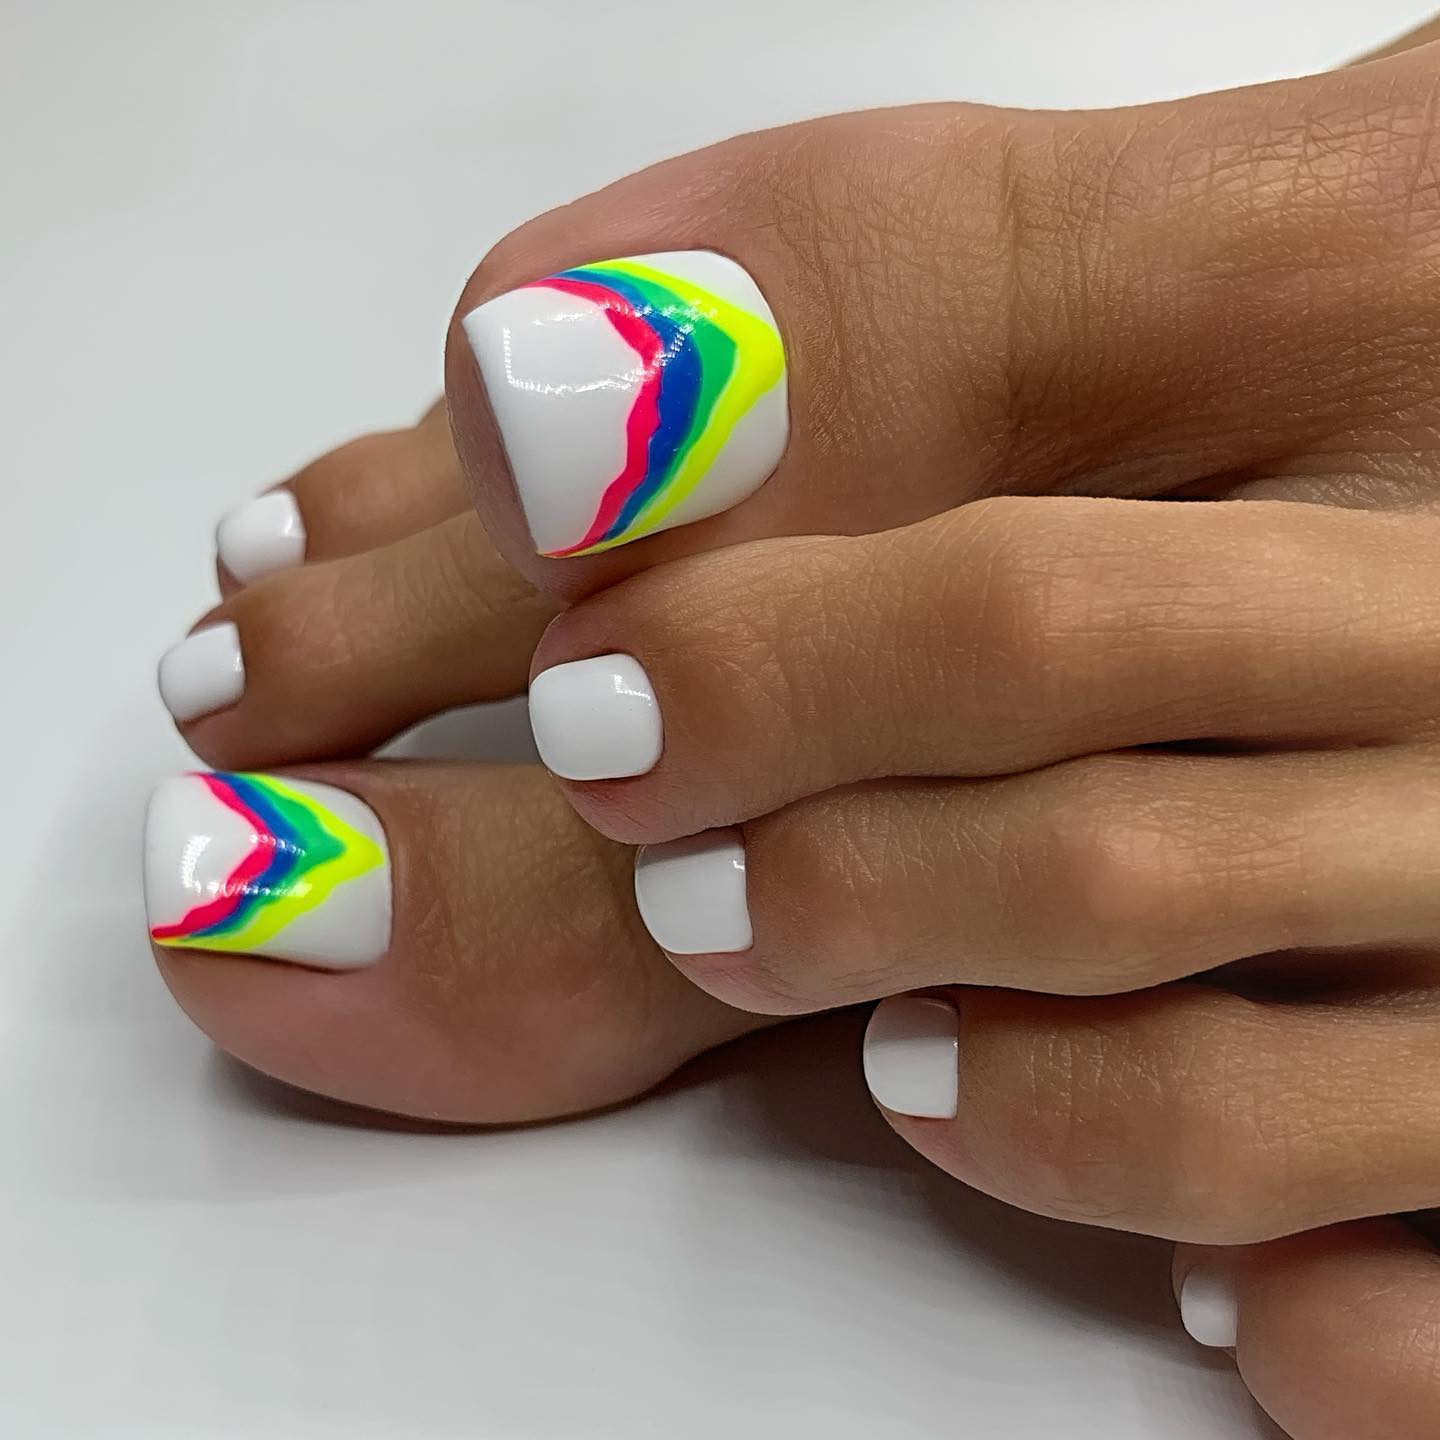 45 Pretty Toe Nails To Try In 2022 : Skittle Colour Toe Nails